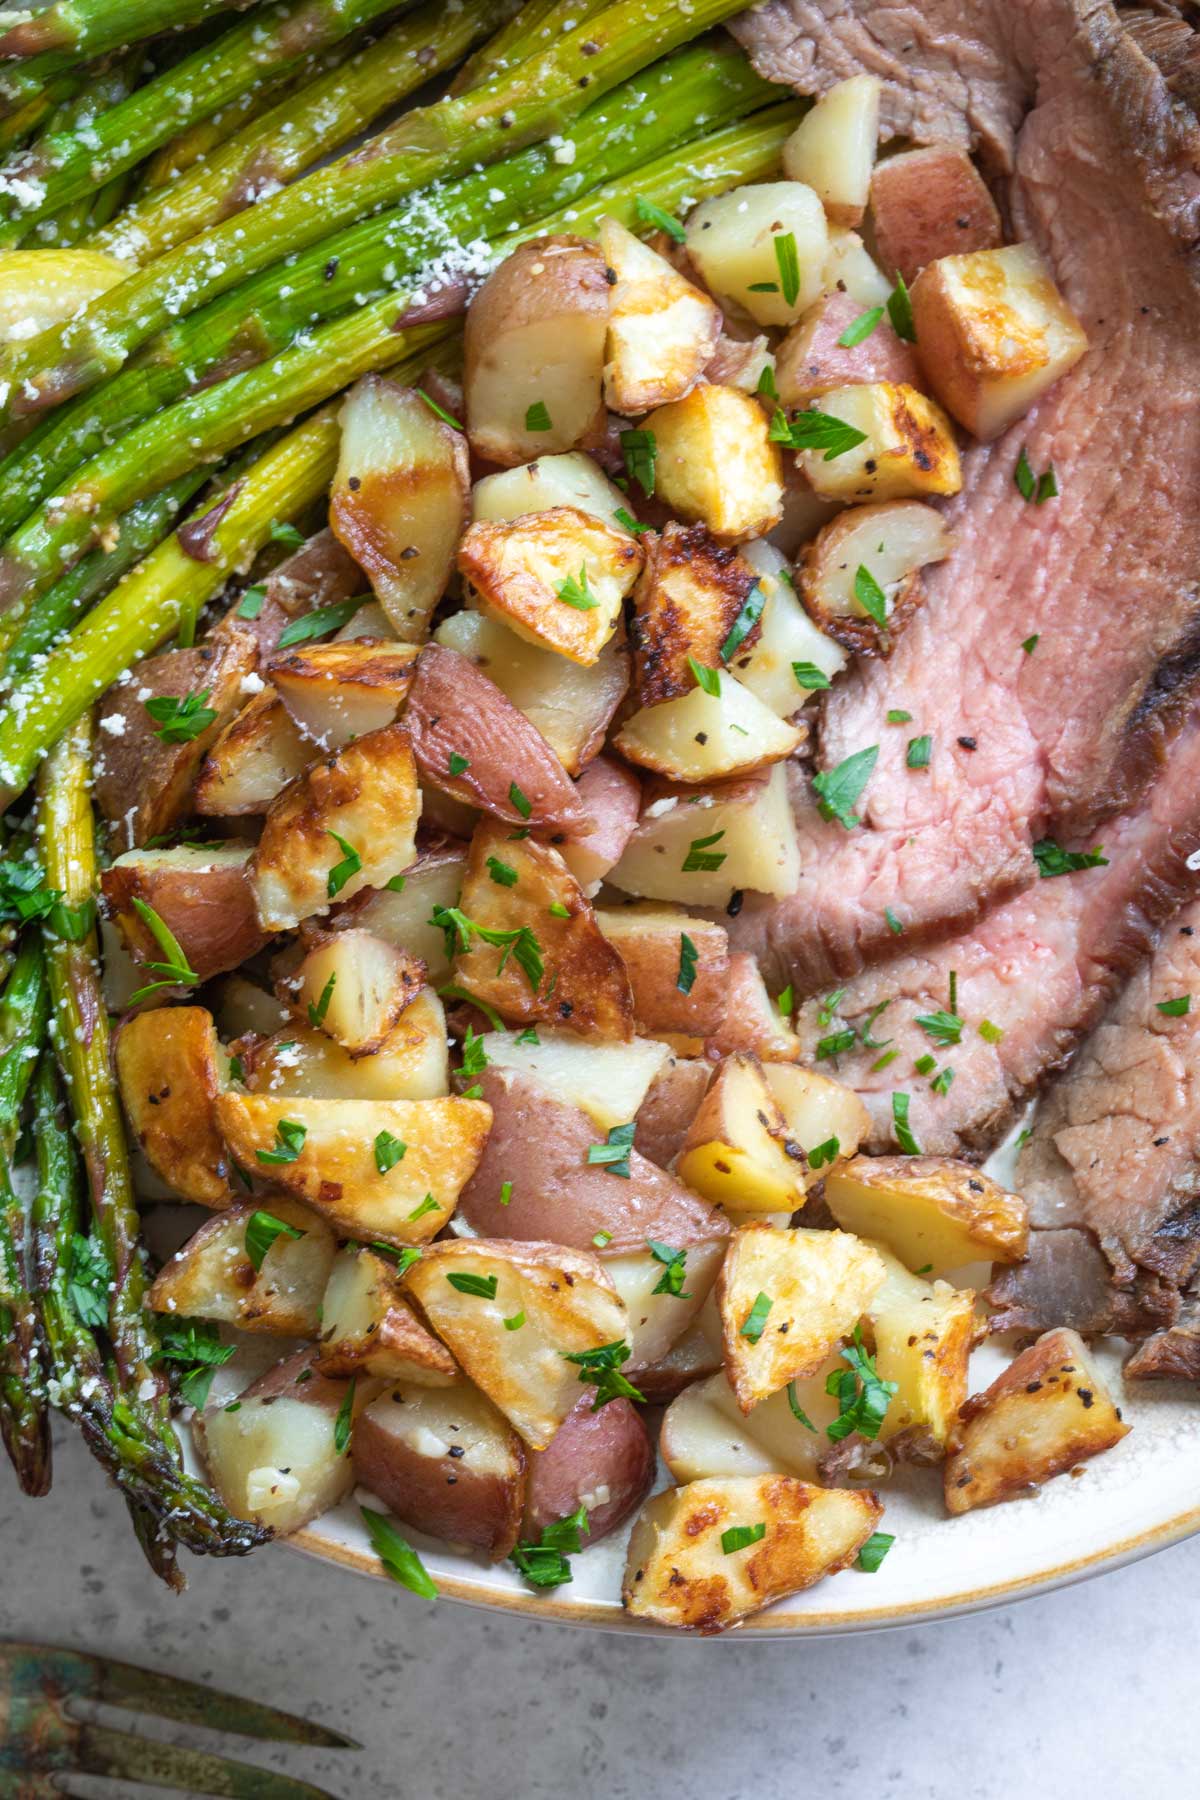 Closeup of potatoes plated between grilled asparagus and sliced flank steak.